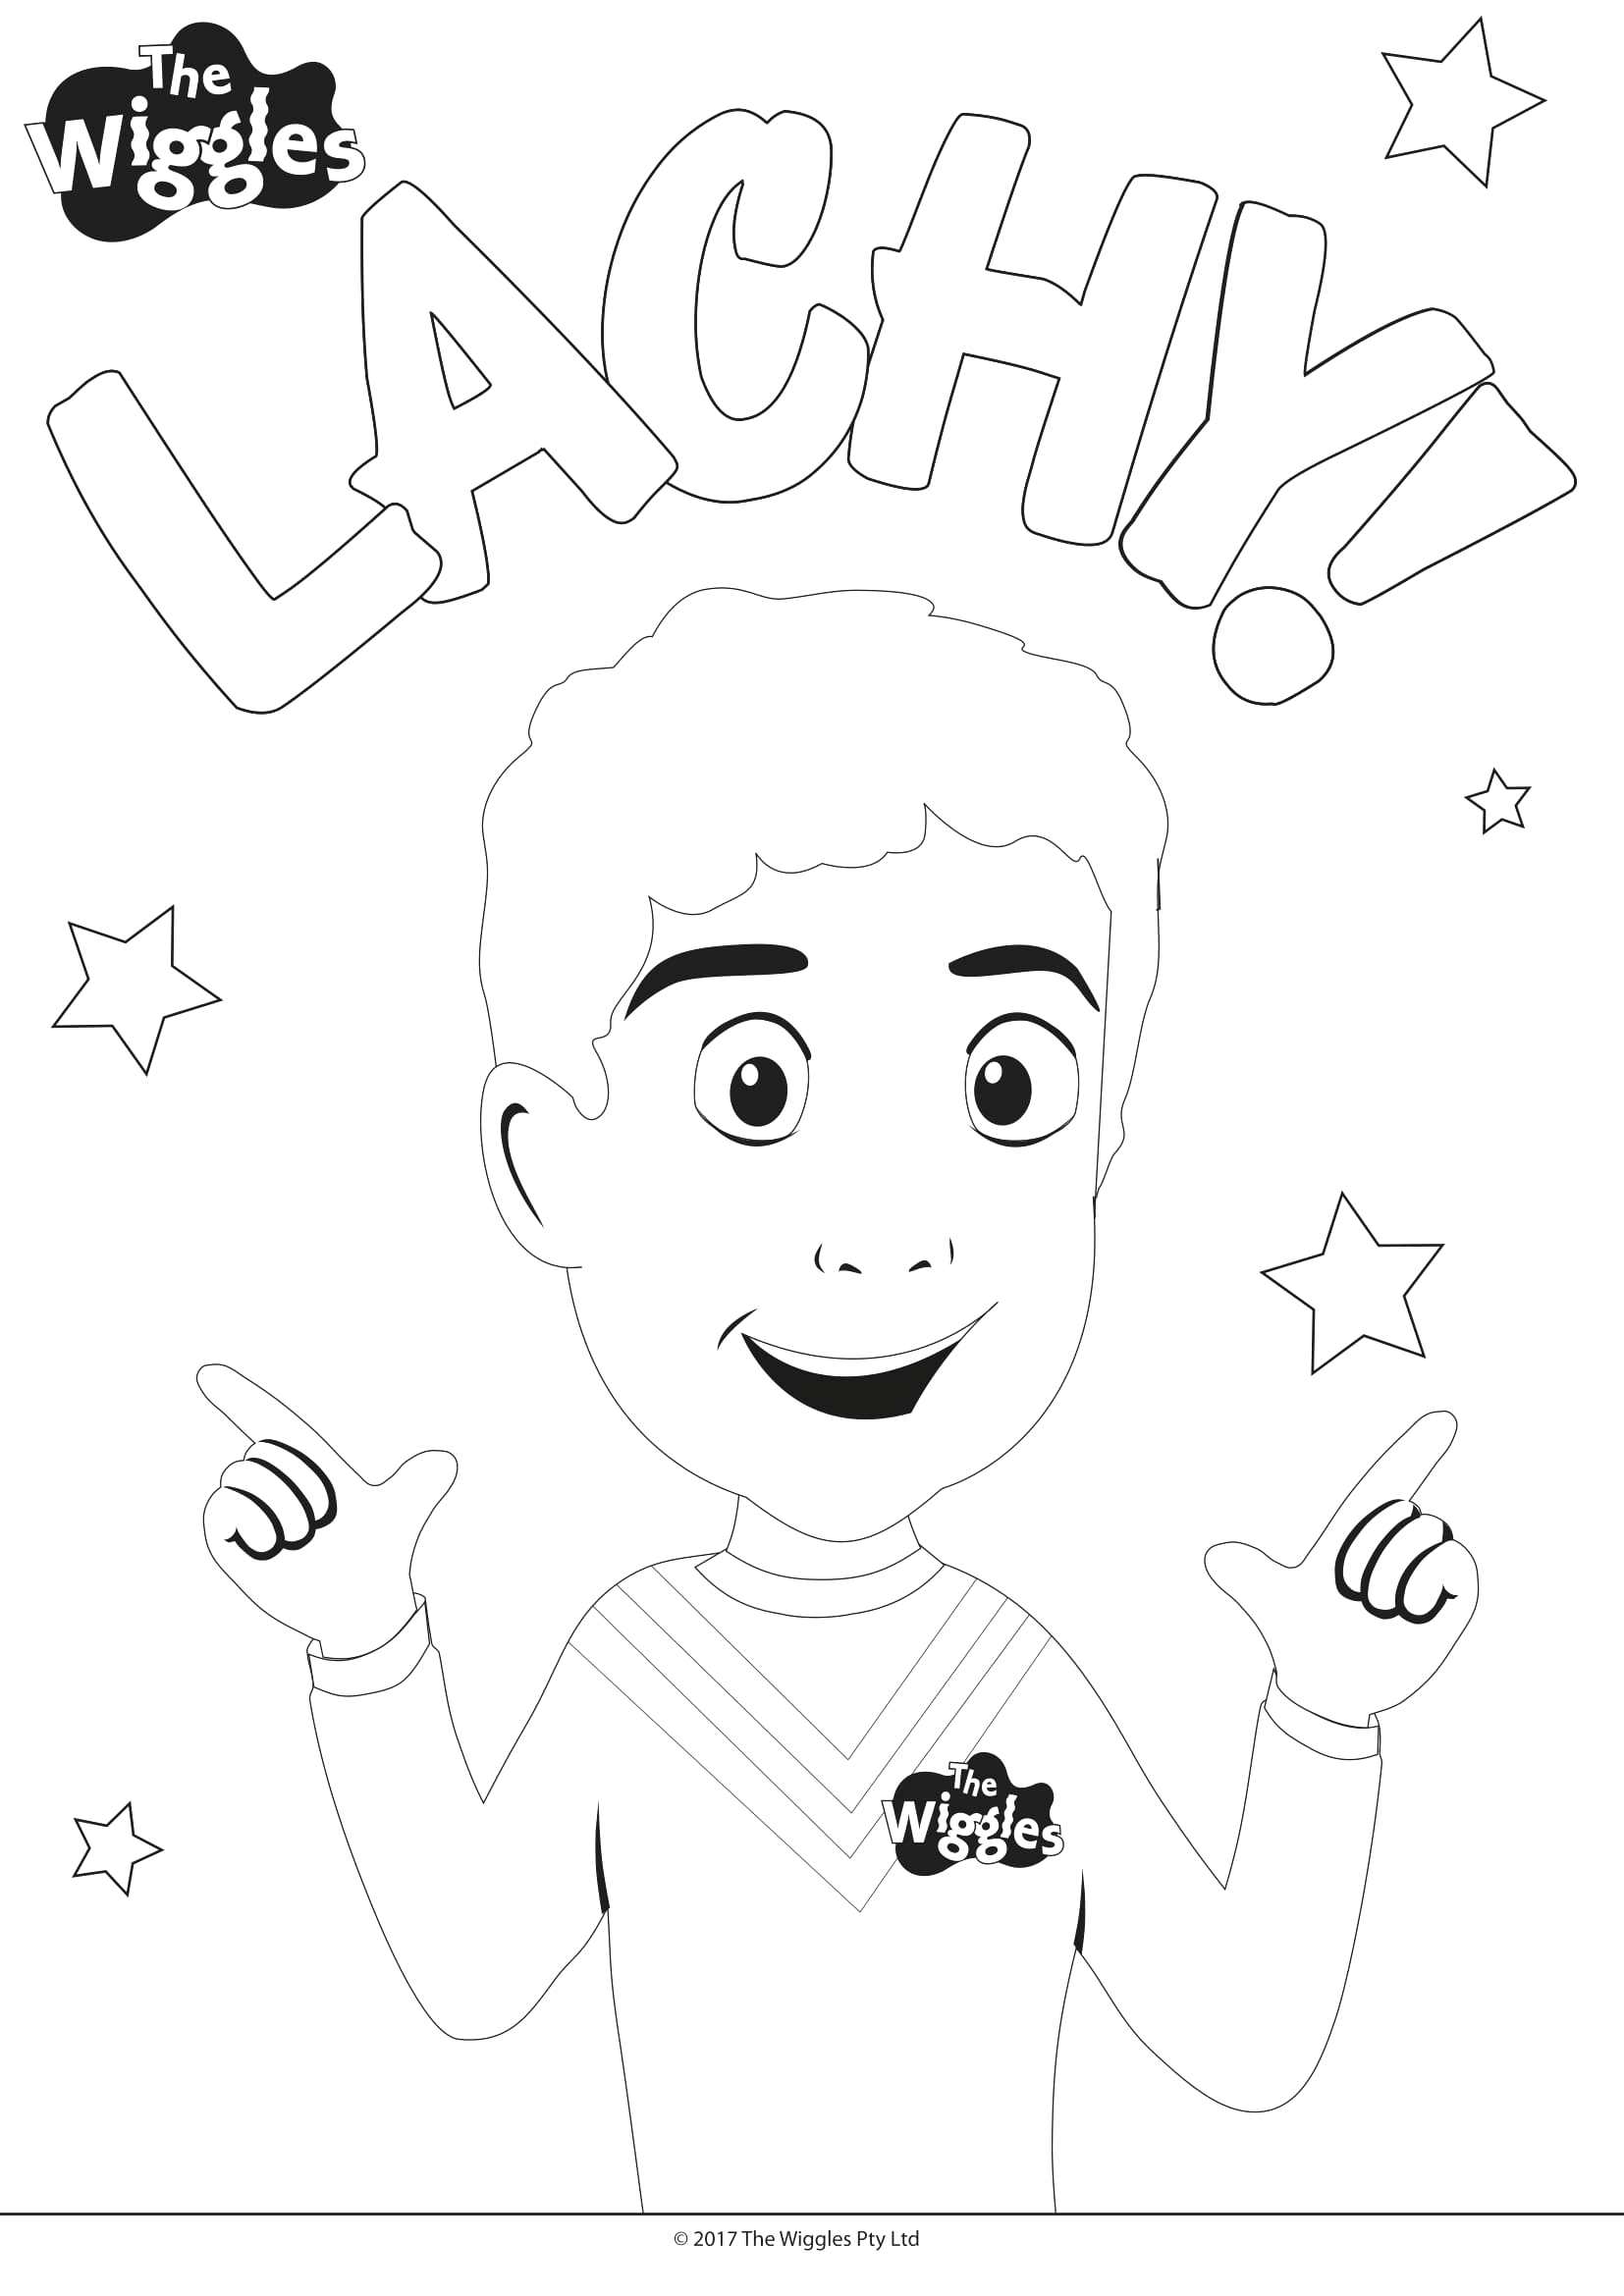 Make A Face Coloring Page - tgm-sports